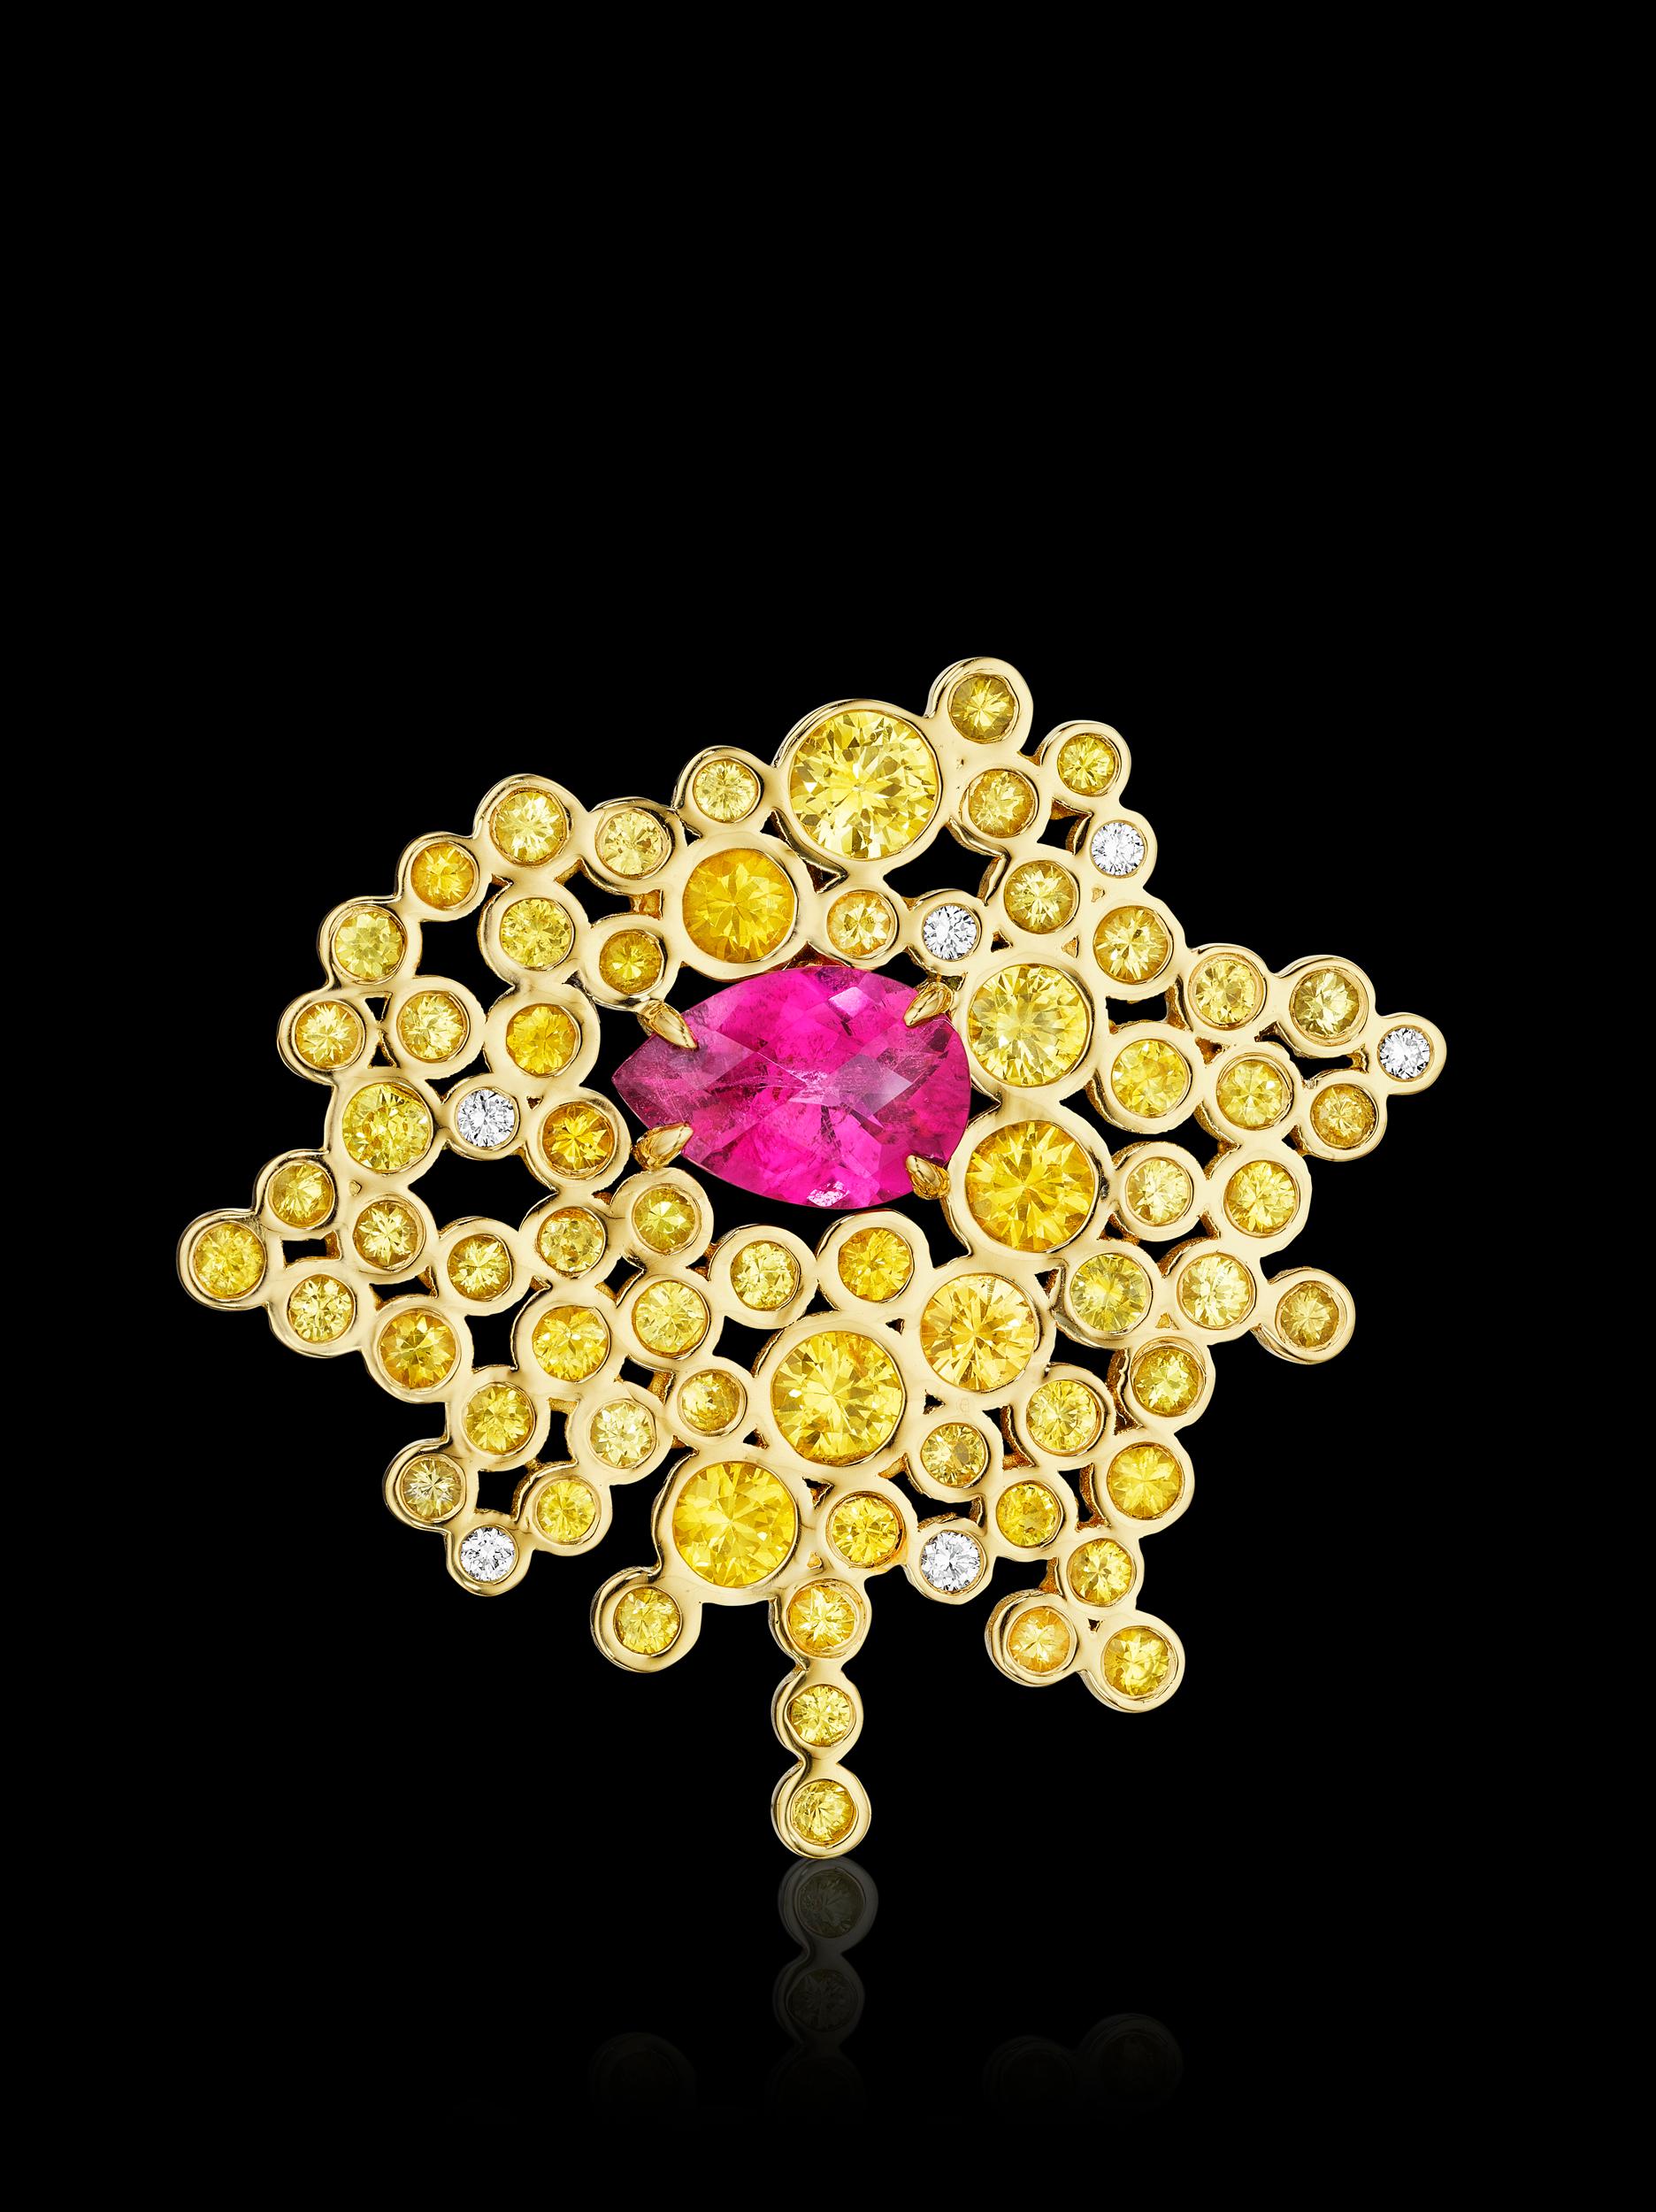 One-of-a-kind Convertible Brooach-Pendant YOKI Design, piece features Yellow Sapphires, Pink Tourmaline, and Diamonds set in 18k yellow gold. Inspired by a butterfly landing on tiny clusters of blooming yellow flowers. 

Centerstone: 12.07mm x